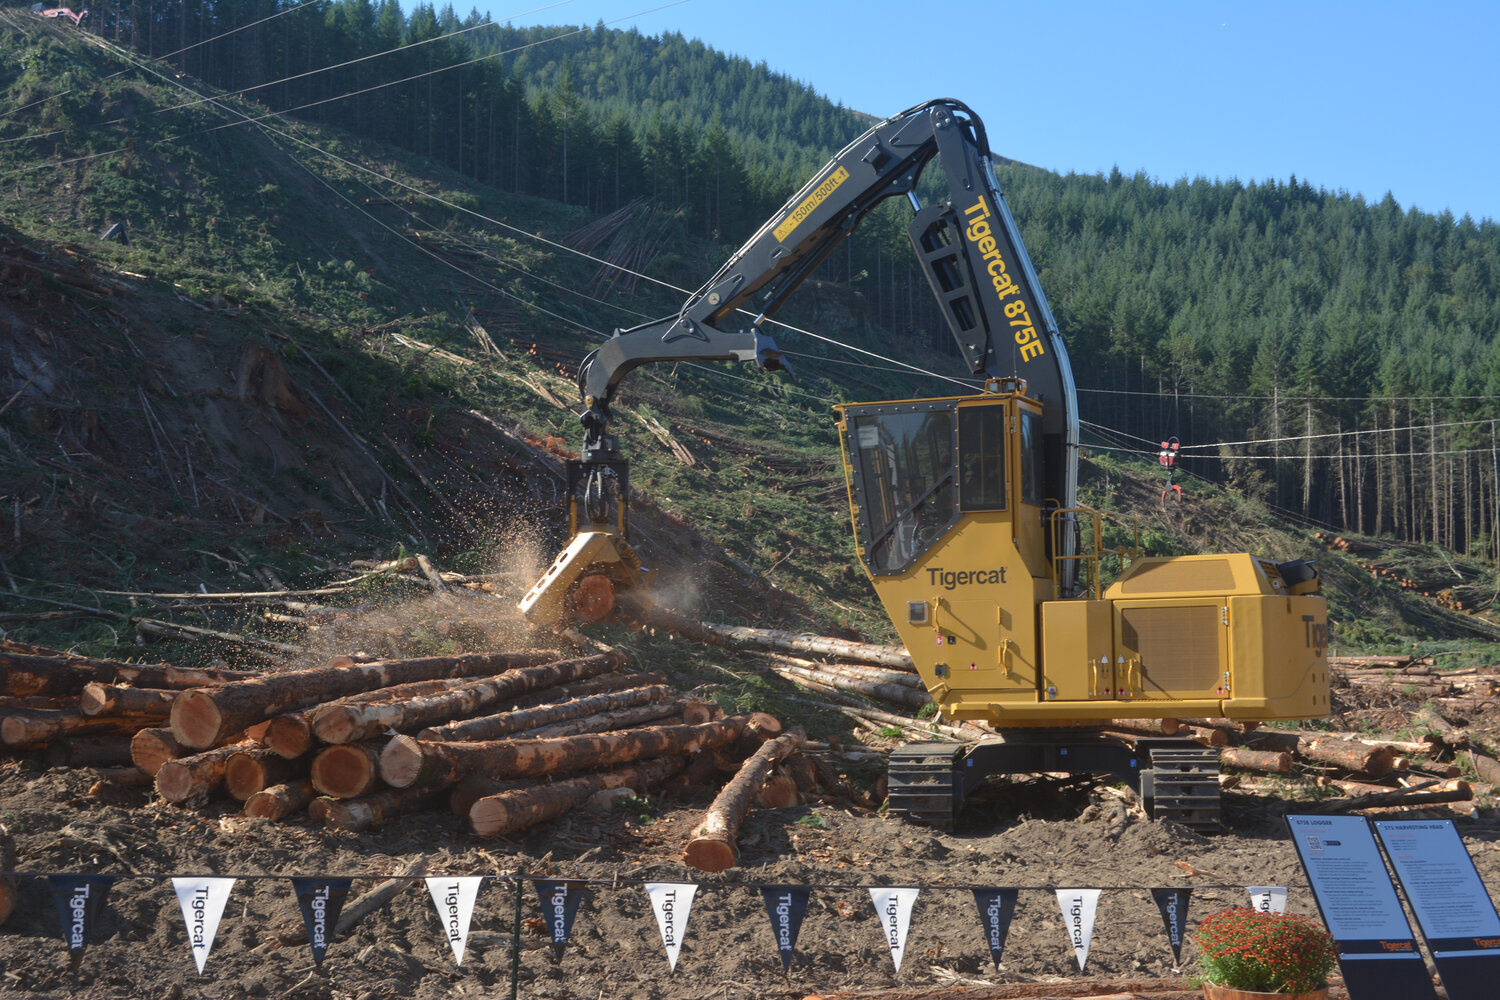 An 875E logger on display sawing through lumber in the Pacific Logging Congress Live In-Woods Show on Sept. 22.